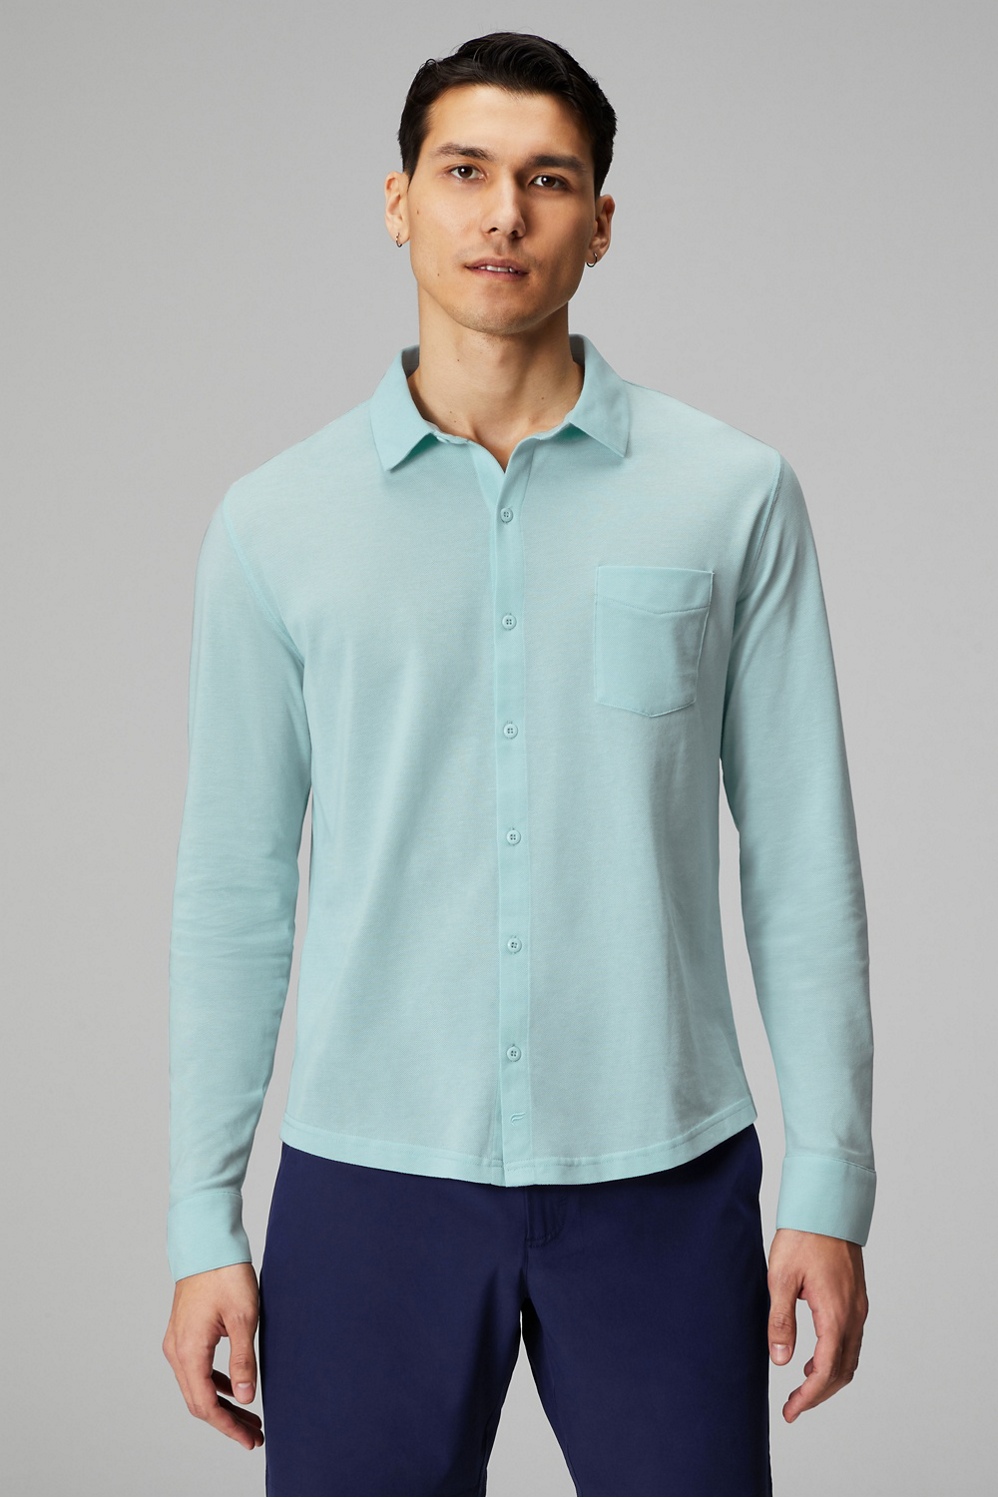 The Dash Long Sleeve Button Up